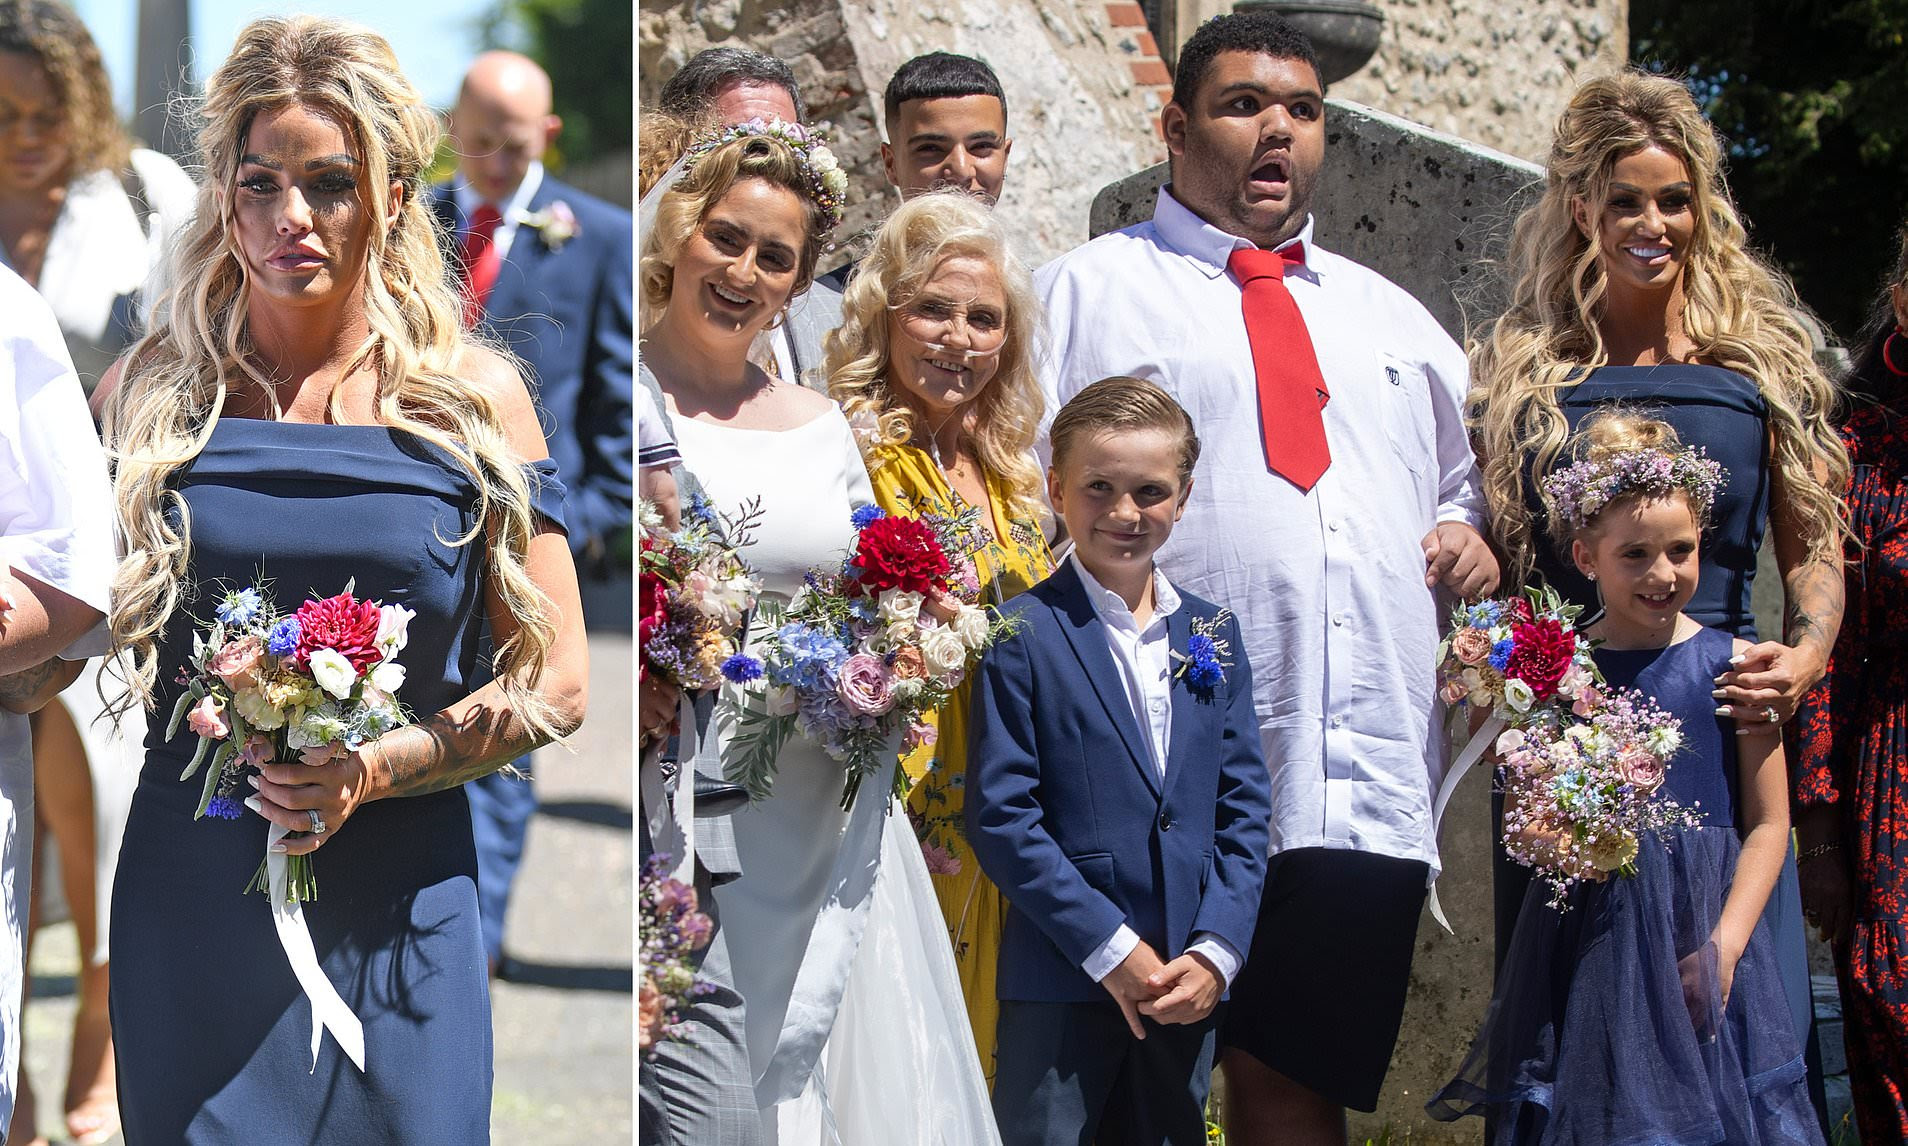 Katie Price looks demure in a navy bridesmaid dress as she arrives at sister Sophie's wedding